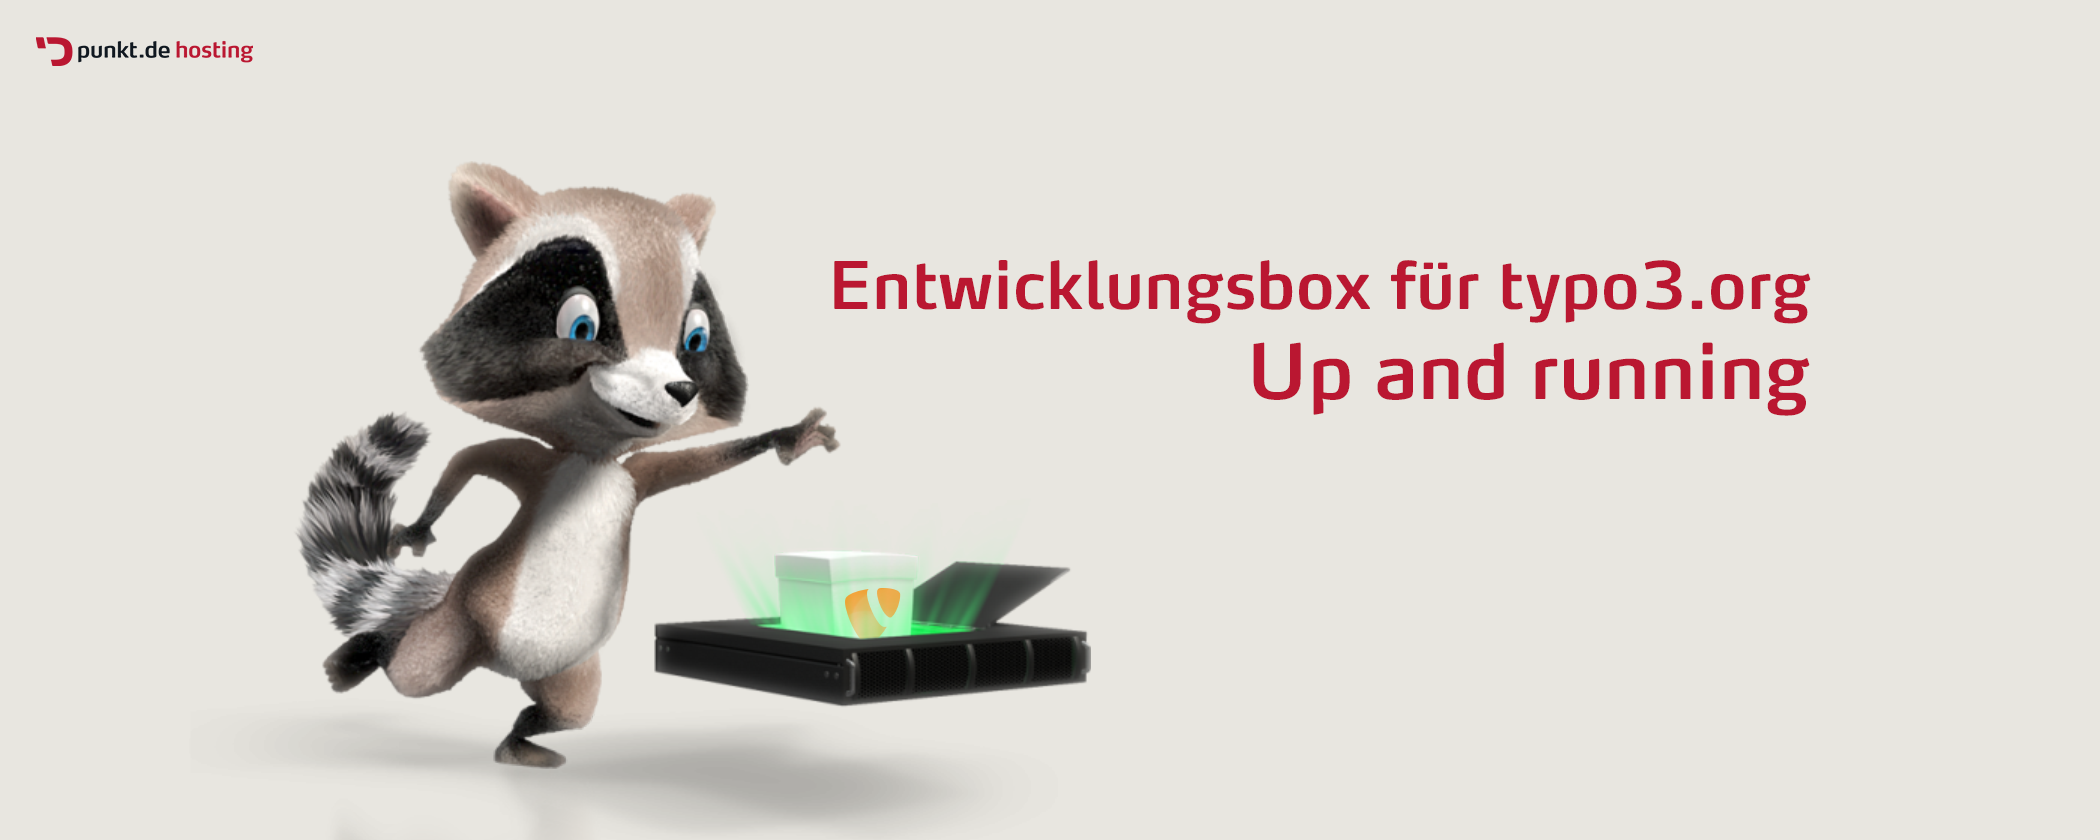 typo3.org Entwicklerbox - Up and running 